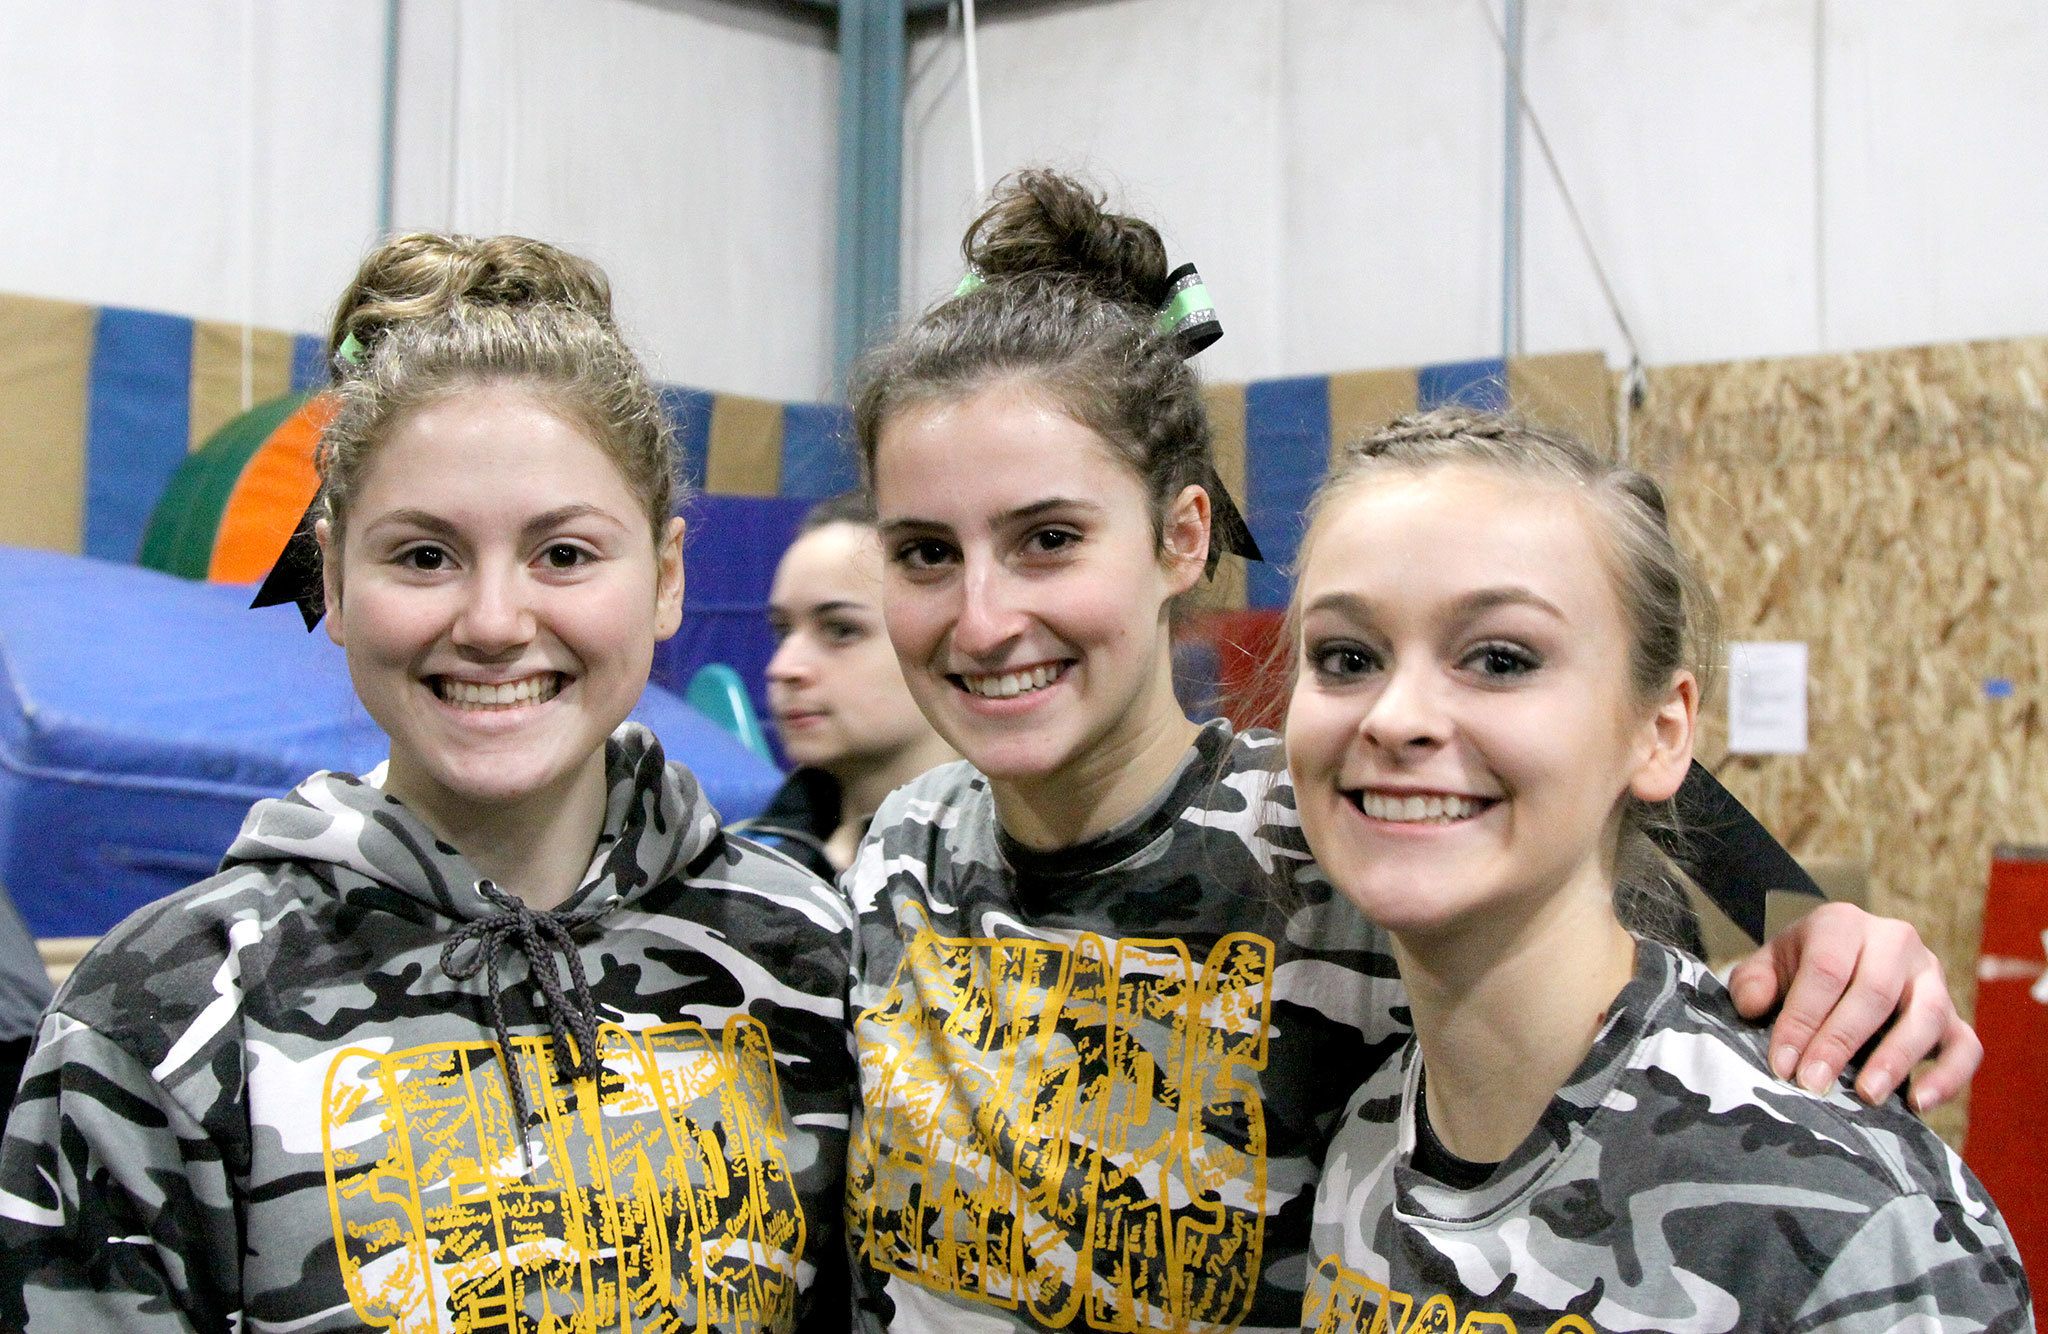 Dave Logan/for the Peninsula Daily News                                The Port Angeles gymnastics team seniors enjoy their home meet Monday. From left are Nikaila Price, Maya Wharton, and Laura Rooney.